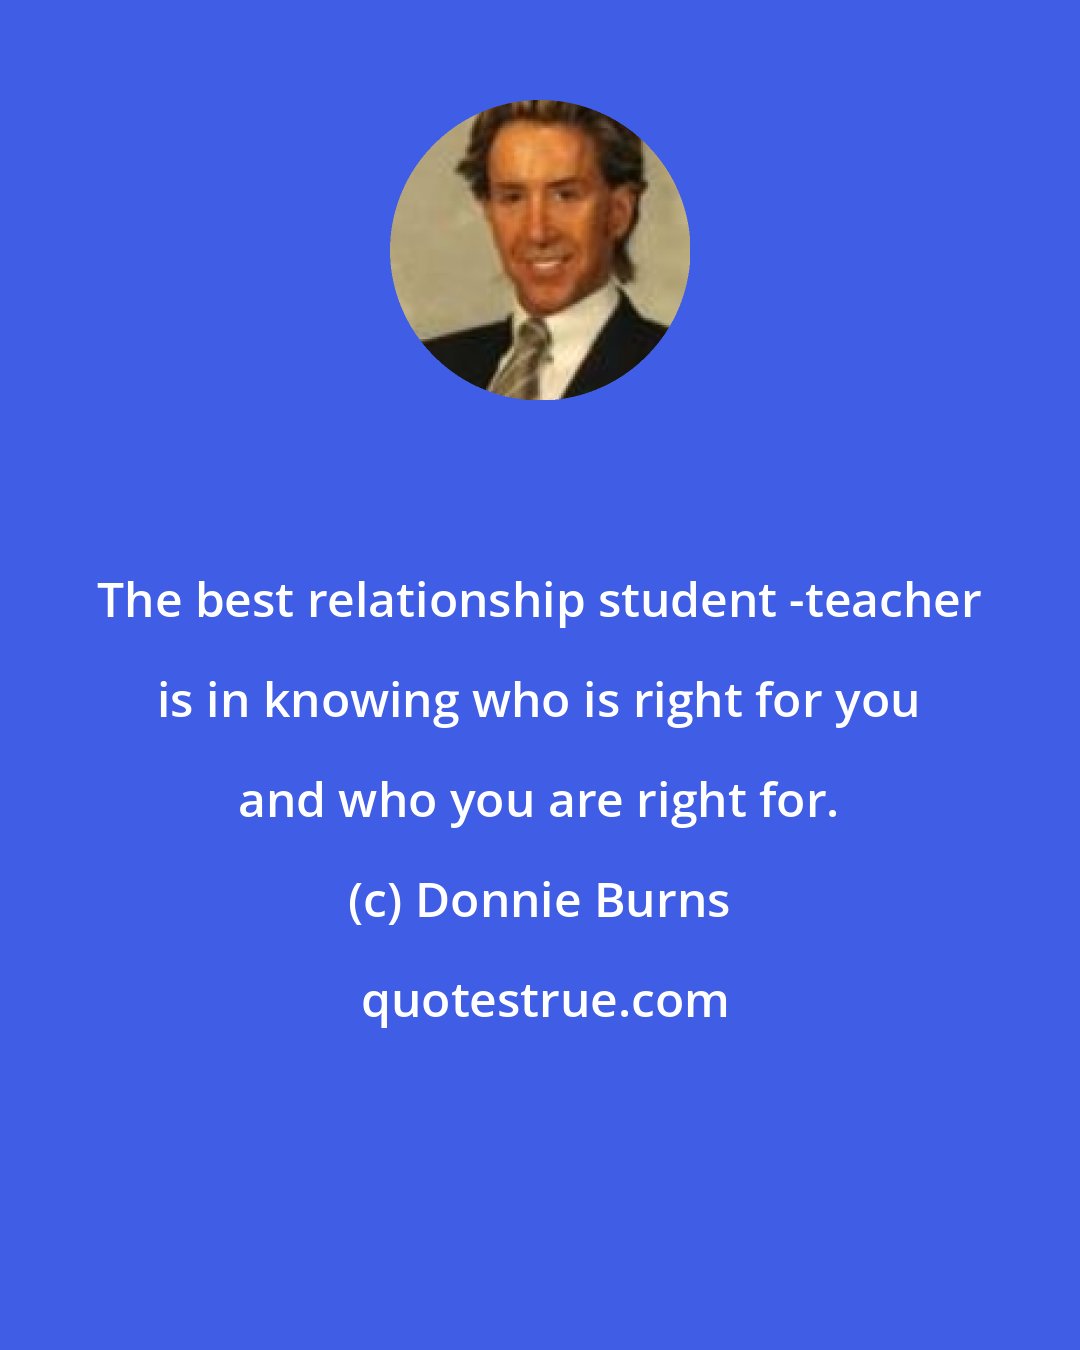 Donnie Burns: The best relationship student -teacher is in knowing who is right for you and who you are right for.